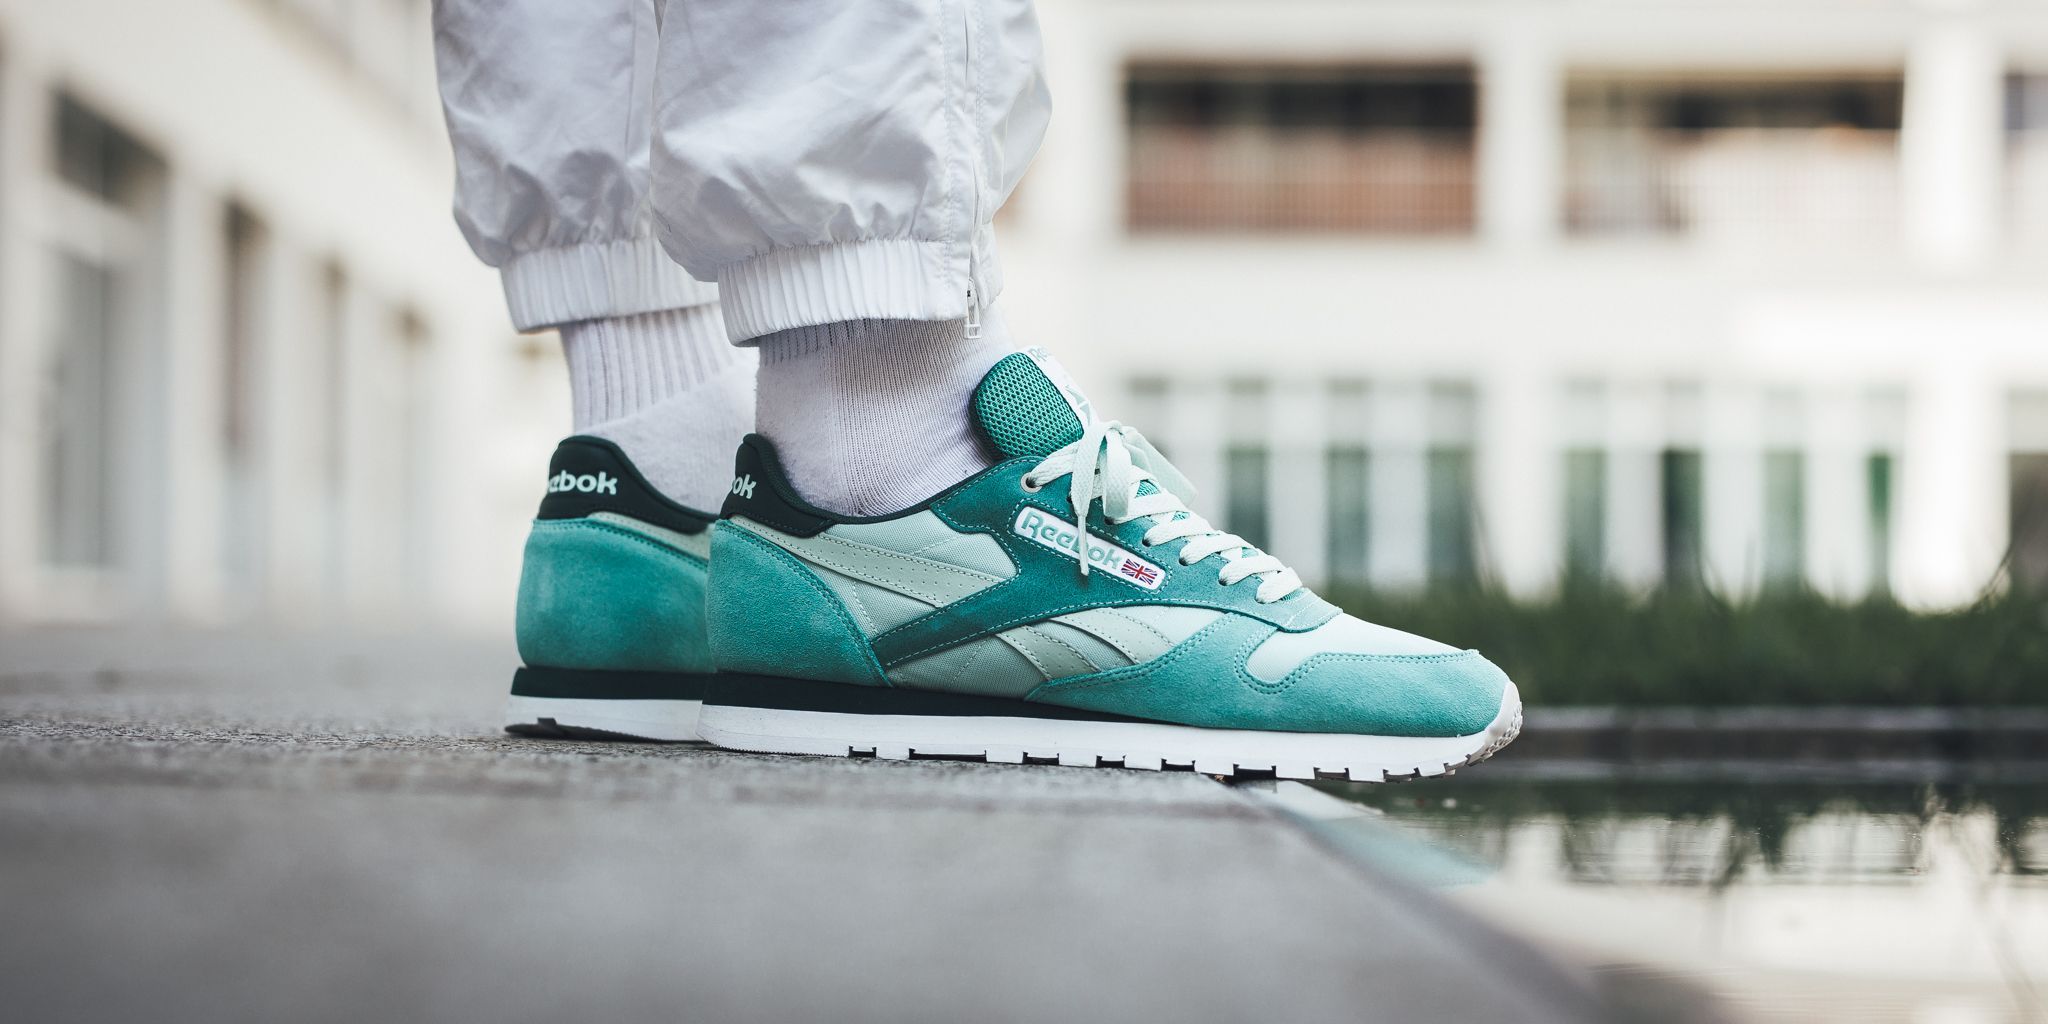 in the meantime cold metric Titolo on Twitter: "#new Montana-Cans Color System x Reebok Classic Leather  🐬 Malachite Light/Malachite SHOP HERE ➡️➡️➡️ https://t.co/Z4ErljKKLJ # montana #montanacans #montanaxreebok #reebok #reebokclassics  https://t.co/eTr5uXi1Cy" / Twitter